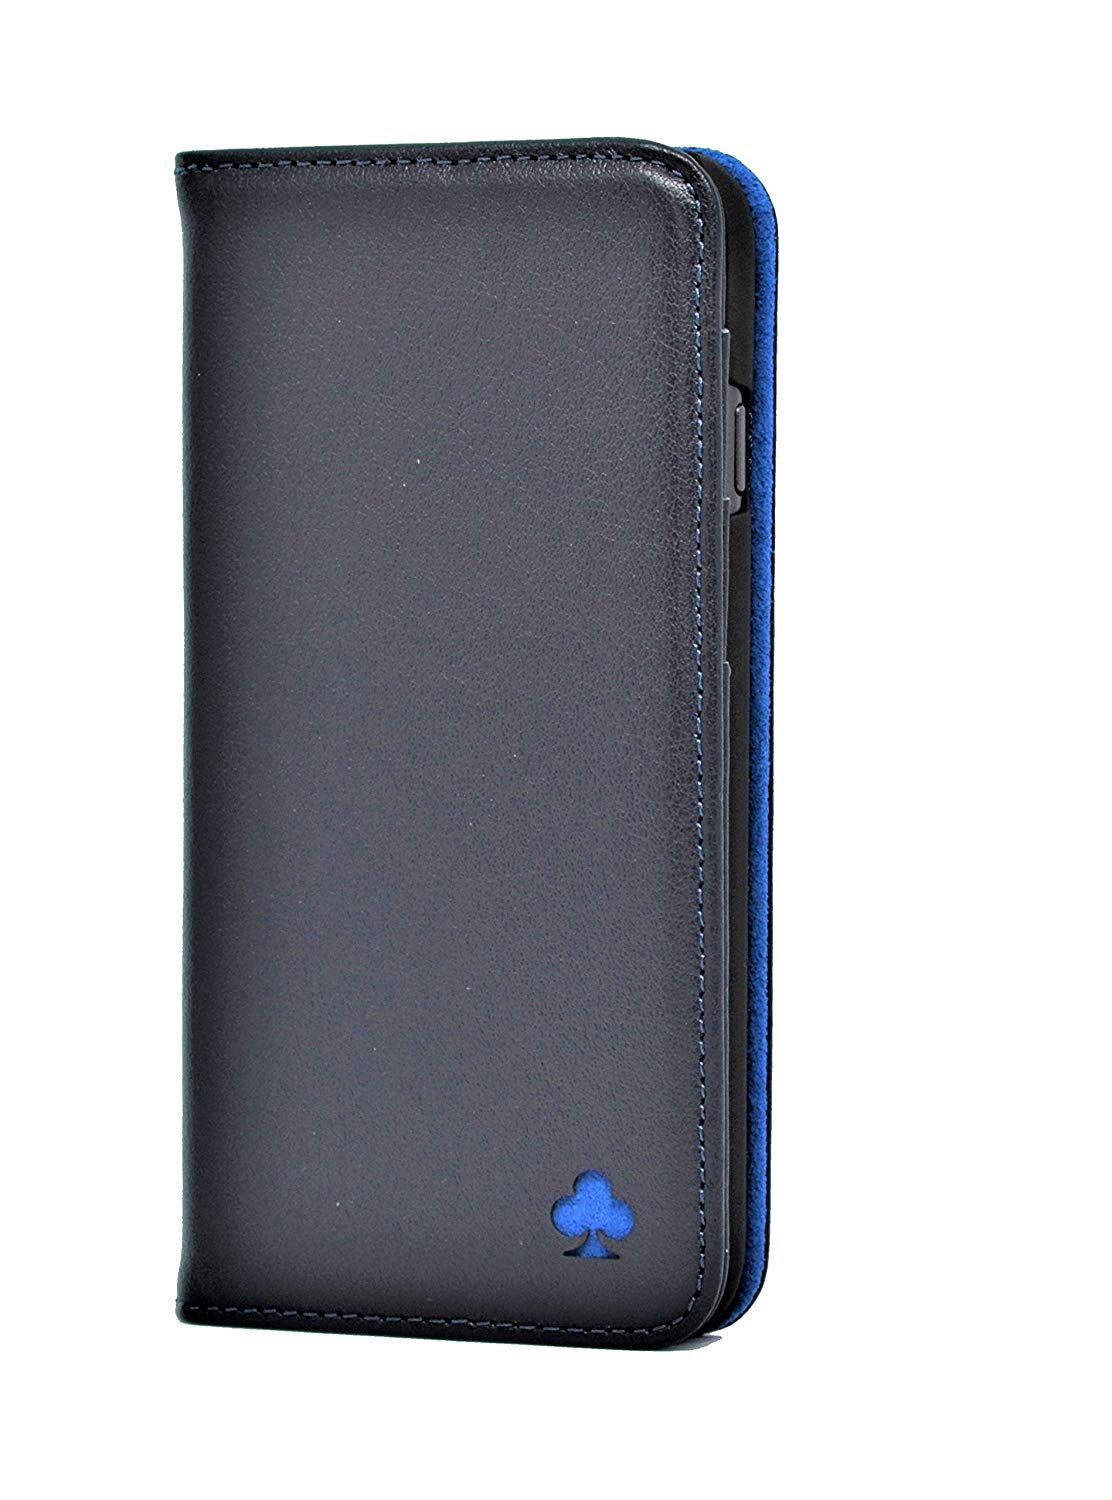 iPhone 7 Plus / 8 Plus Leather Case. Premium Slim Genuine Leather Stand Case/Cover/Wallet (Navy & Blue)